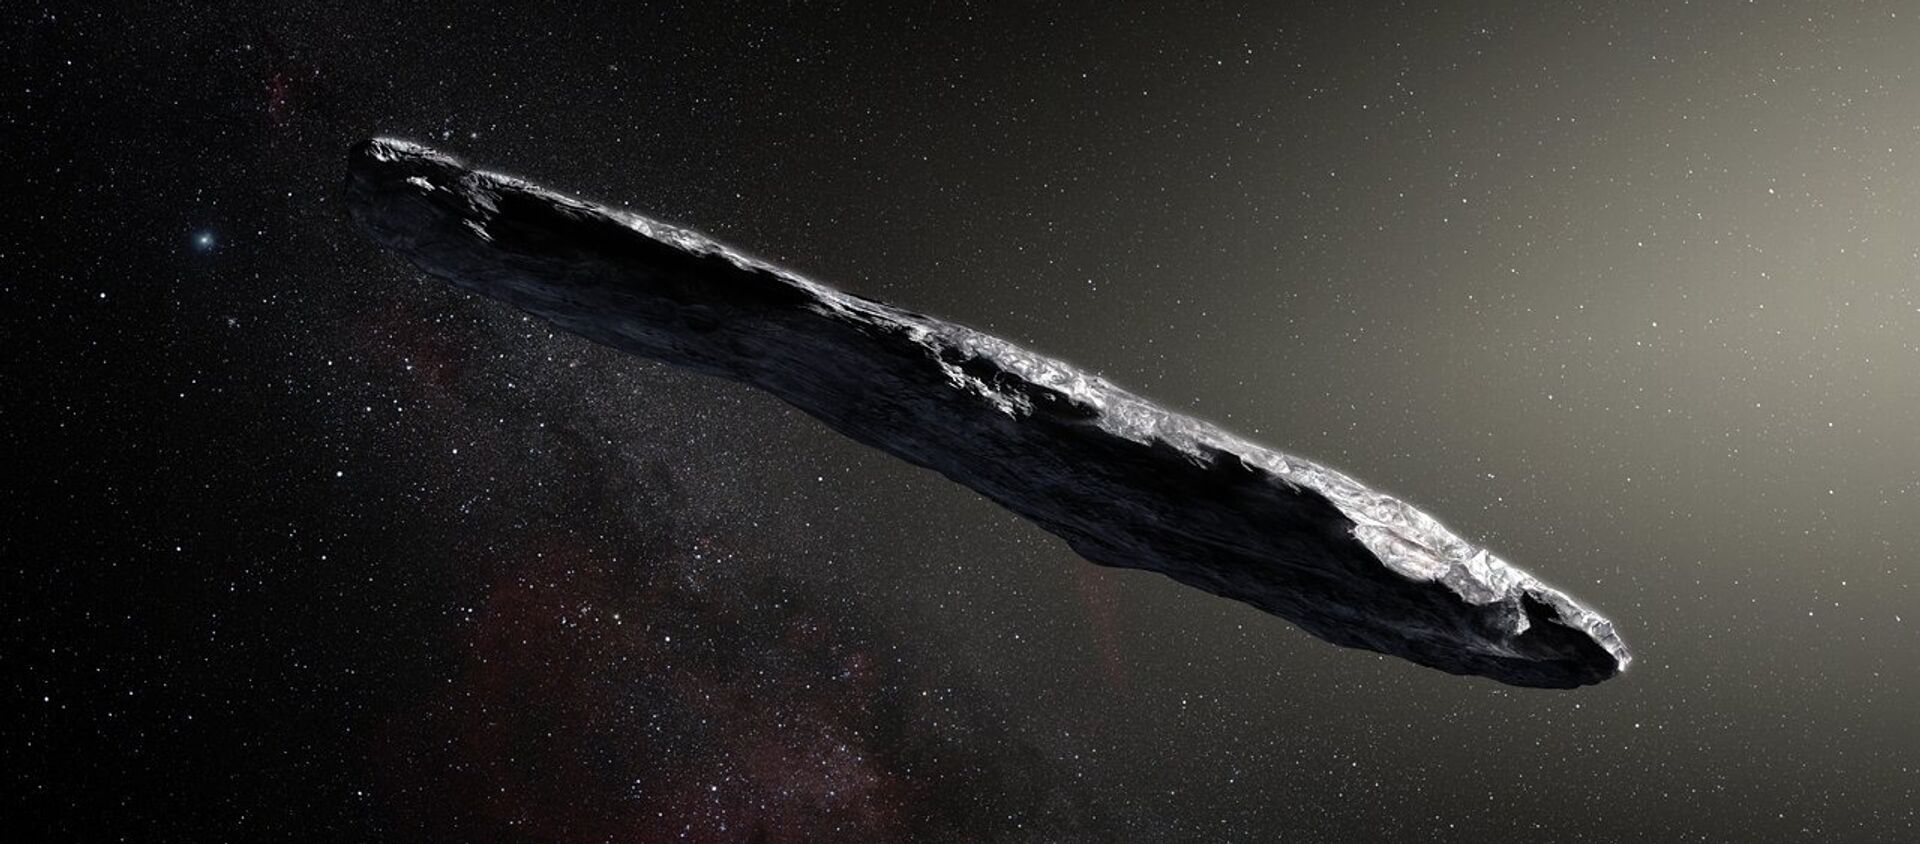 This artist’s impression shows the first interstellar asteroid: 'Oumuamua. This unique object was discovered on 19 October 2017 by the Pan-STARRS 1 telescope in Hawai`i. - Sputnik International, 1920, 14.04.2020